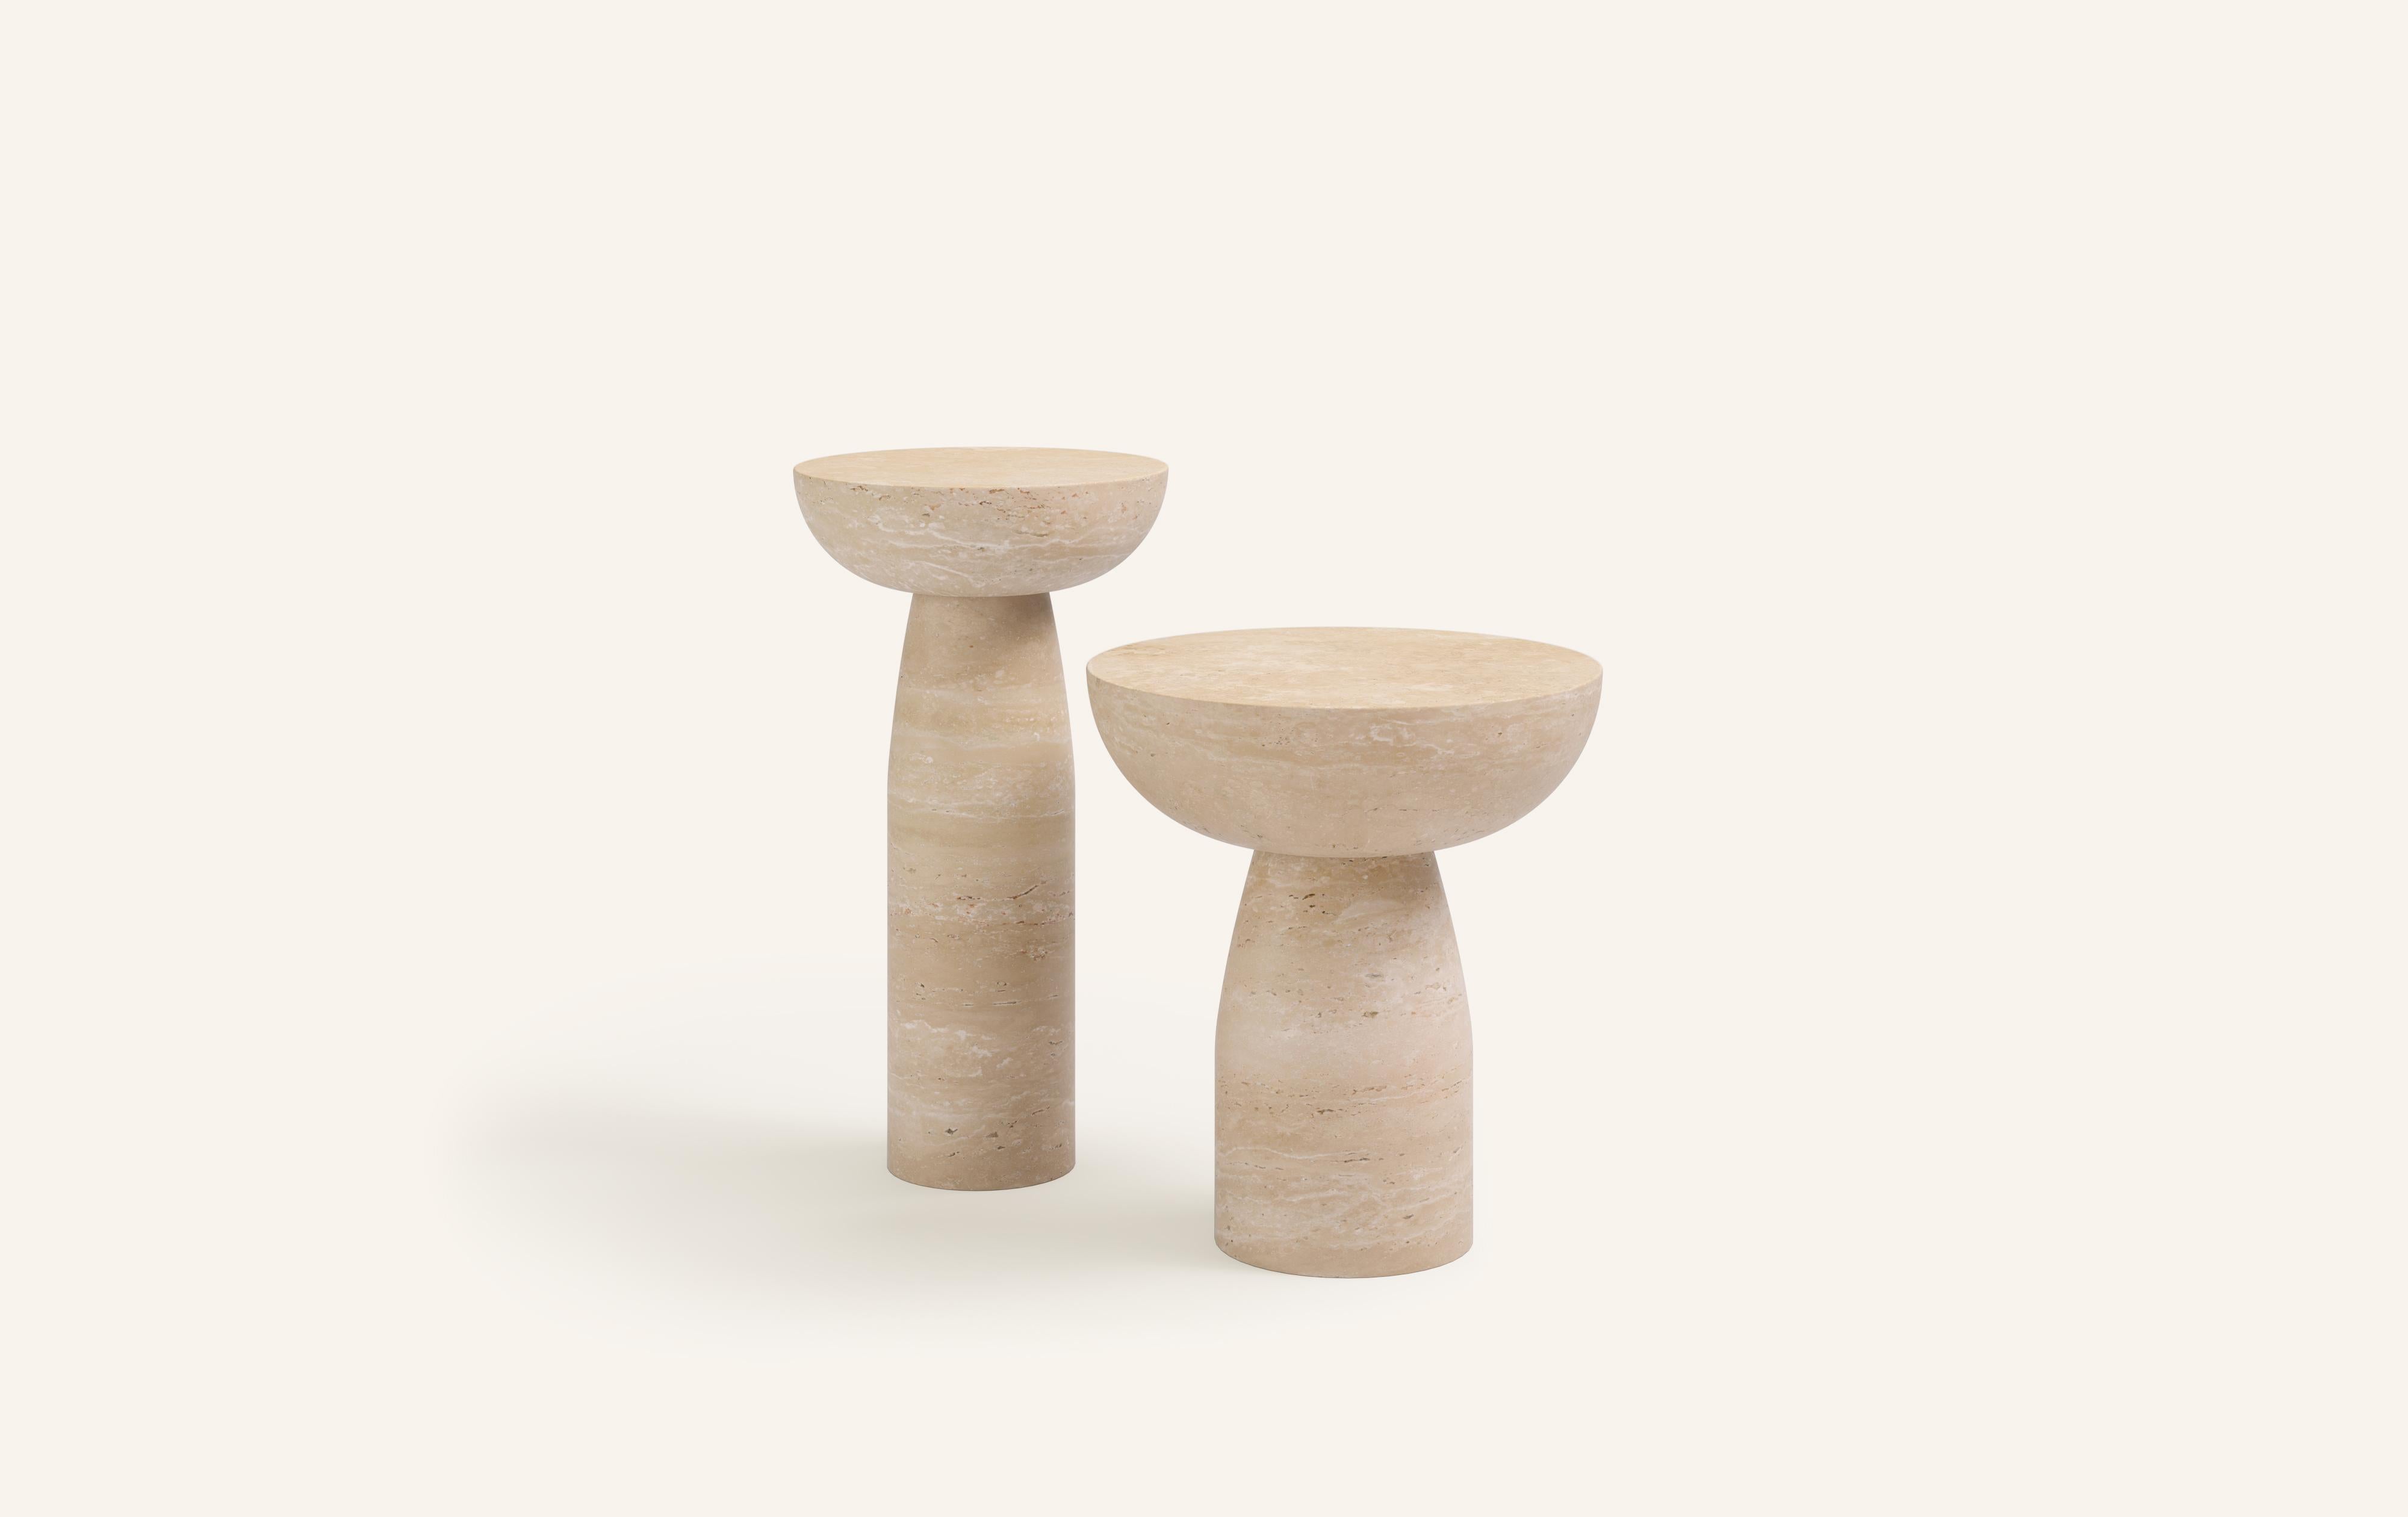 A SLICE OF A ’SPHERE’ OR 'SFERA' IN ITALIAN BALANCES A FLAT SURFACE ATOP AND ROBUST MONOLITH FORM. WITH A BASE SOFTENED BY A CURVED PROFILE, SFERA IS SOFT AND EARTHY IN ITS AVAILABLE STONE SELECTIONS.

DIMENSIONS: (SIDE TABLES SOLD